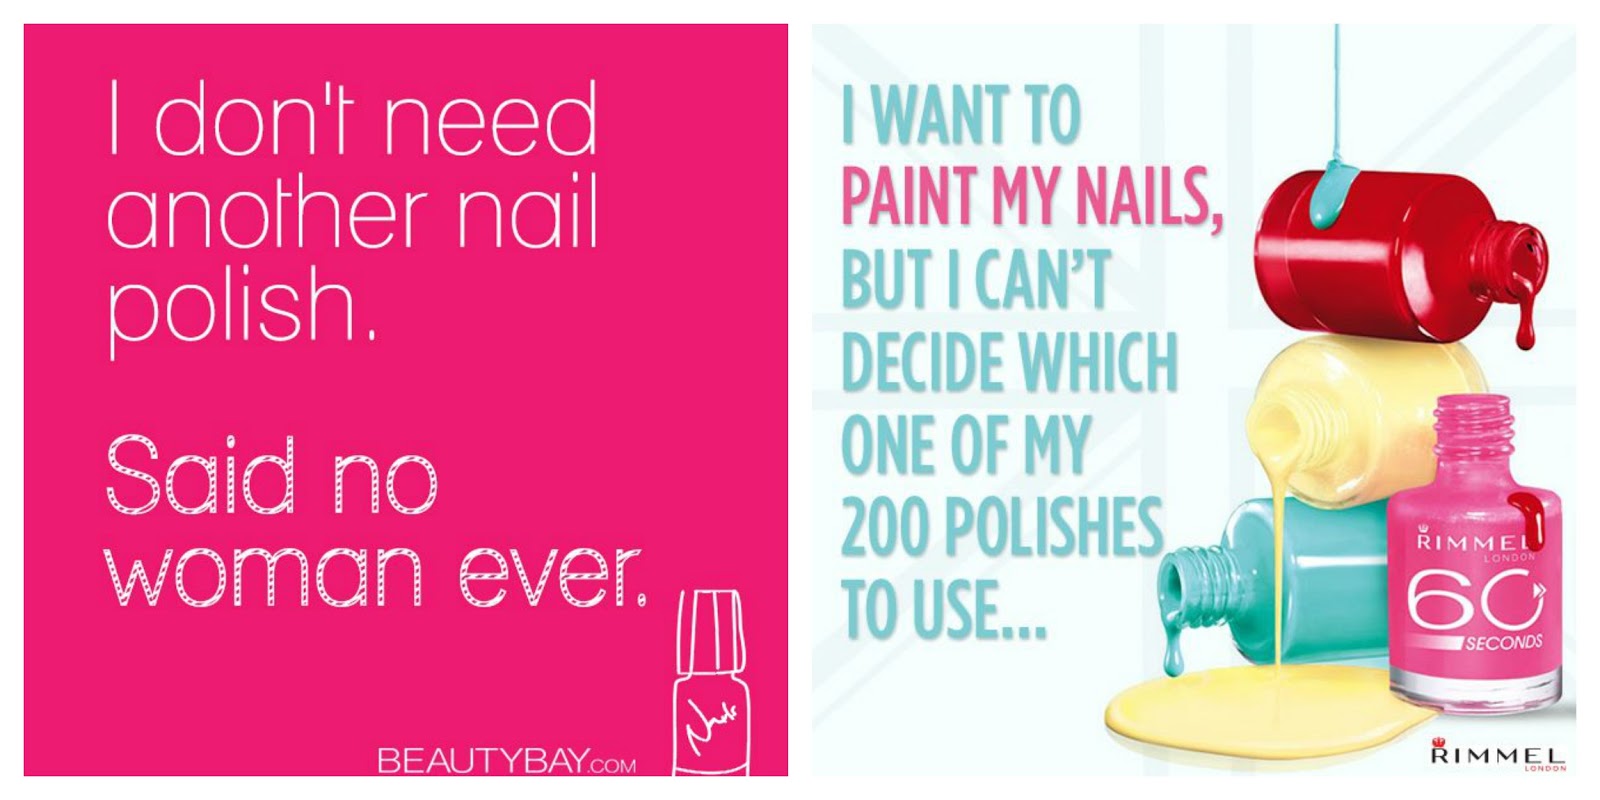 "Nail art is the perfect way to express yourself." - wide 9